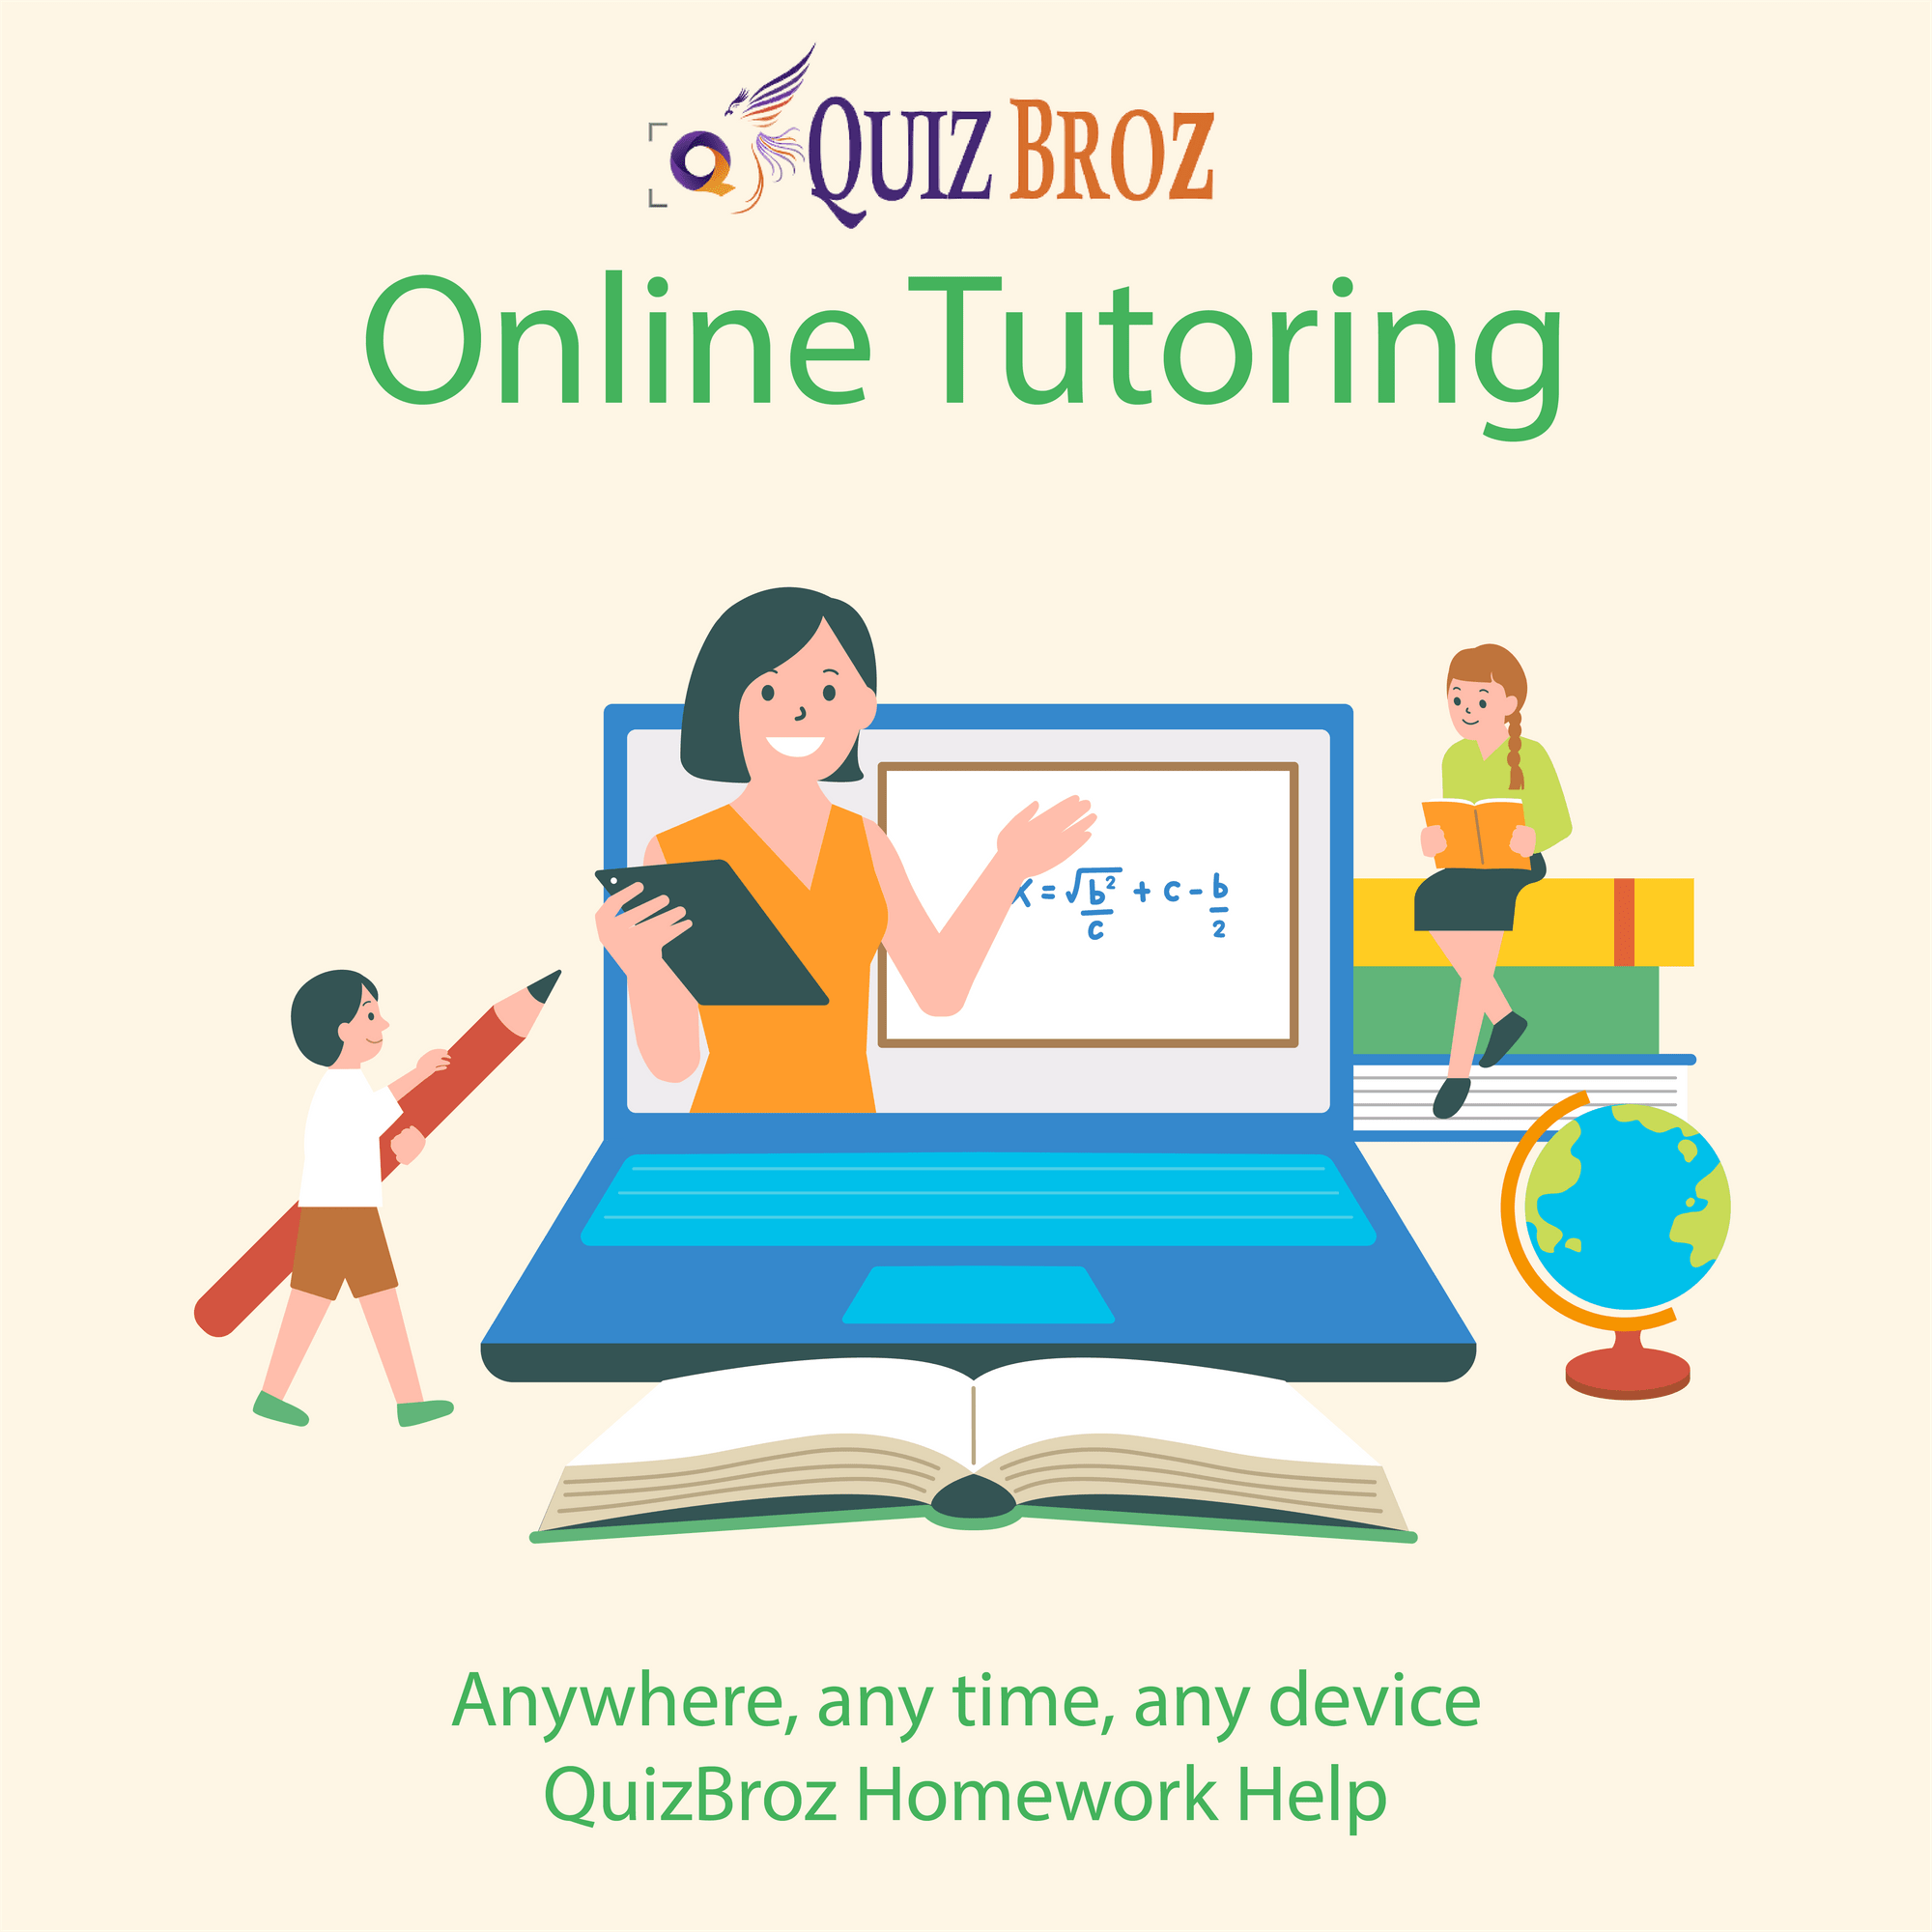 Live Online Tutoring – What are the Advantages?